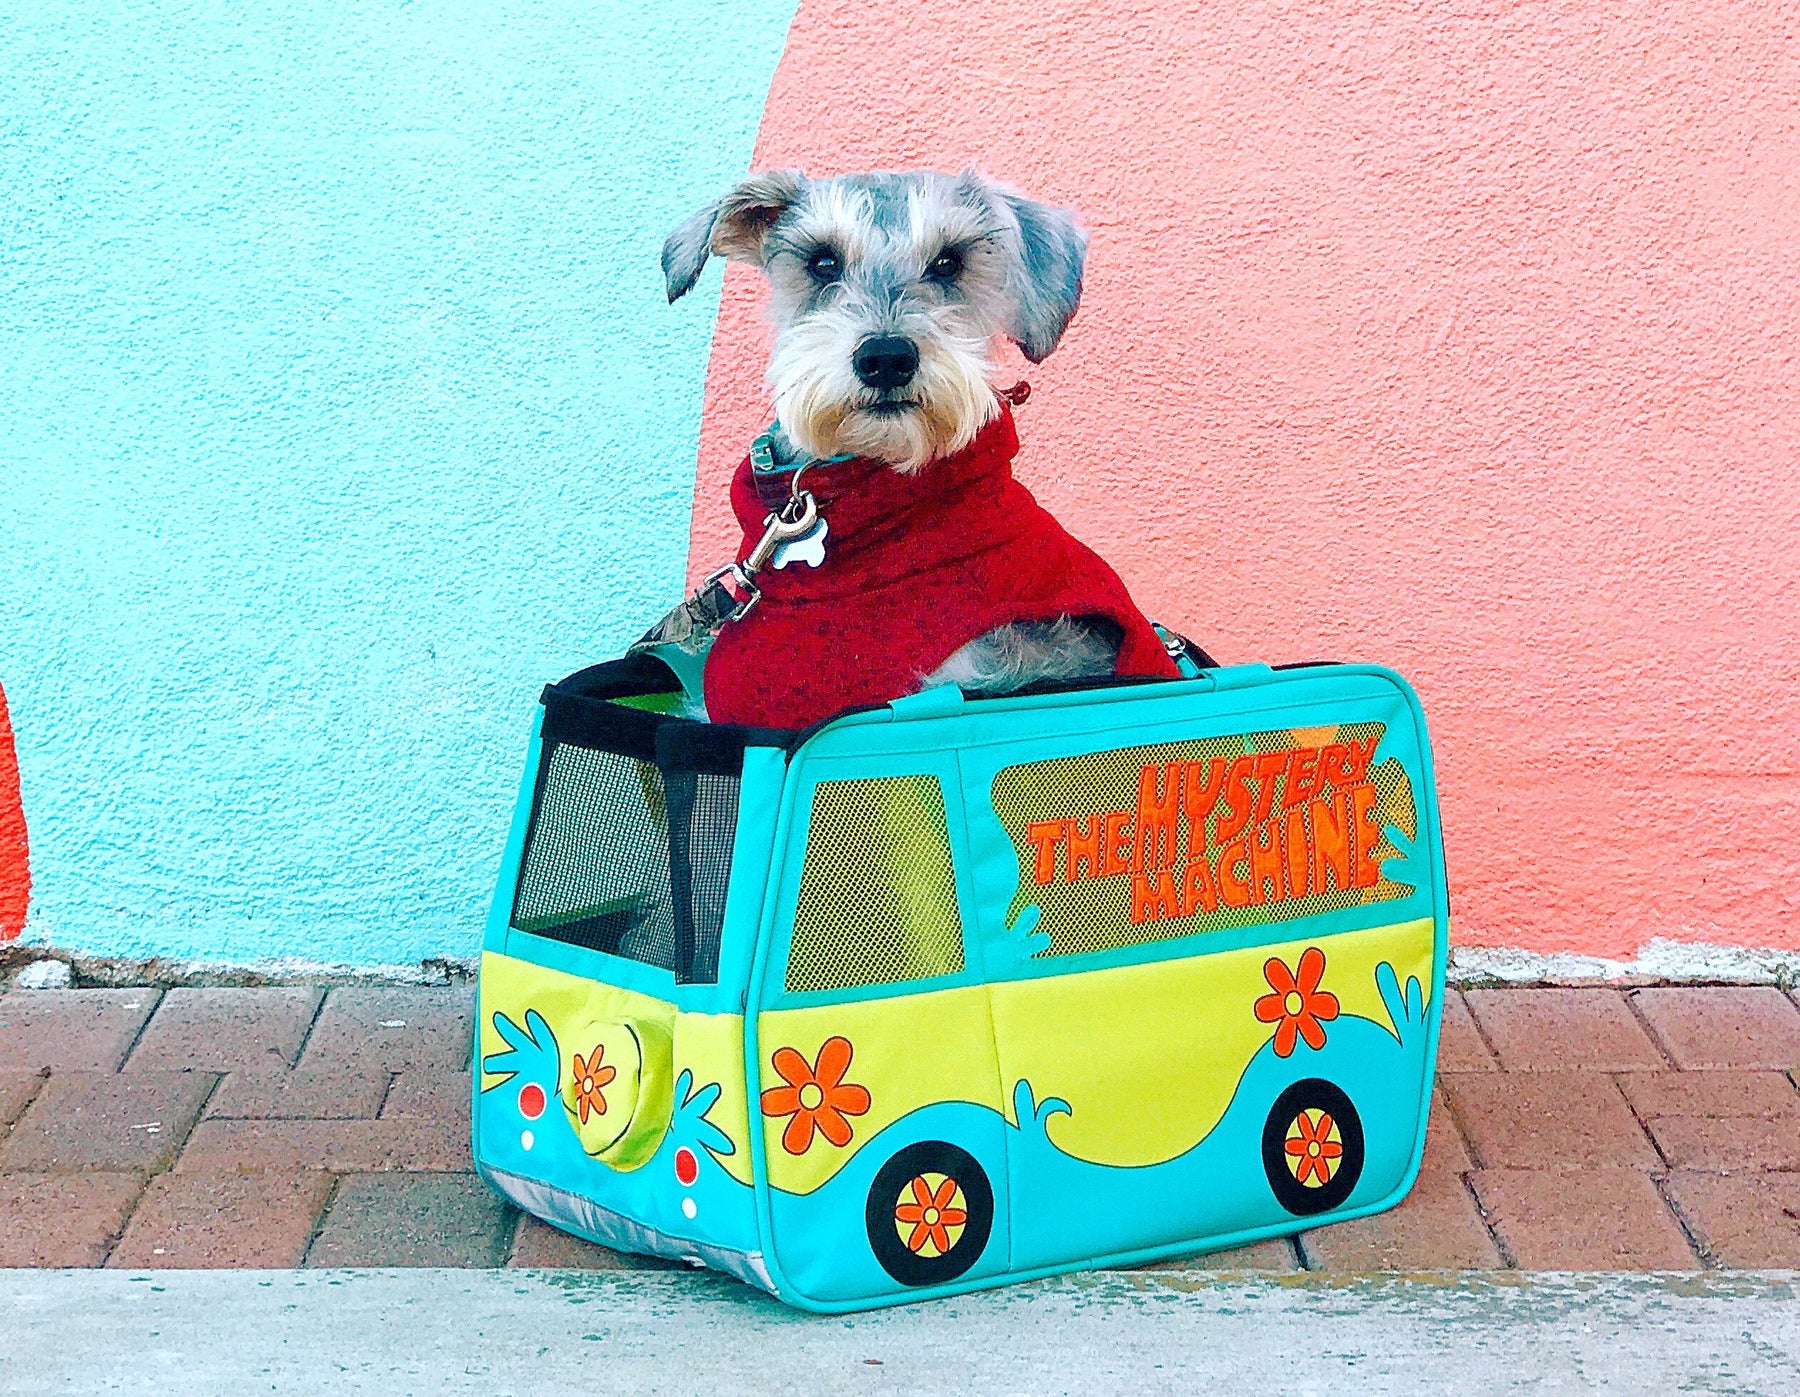 Zoinks! These Pups Have Their Own Personal Mystery Machines!